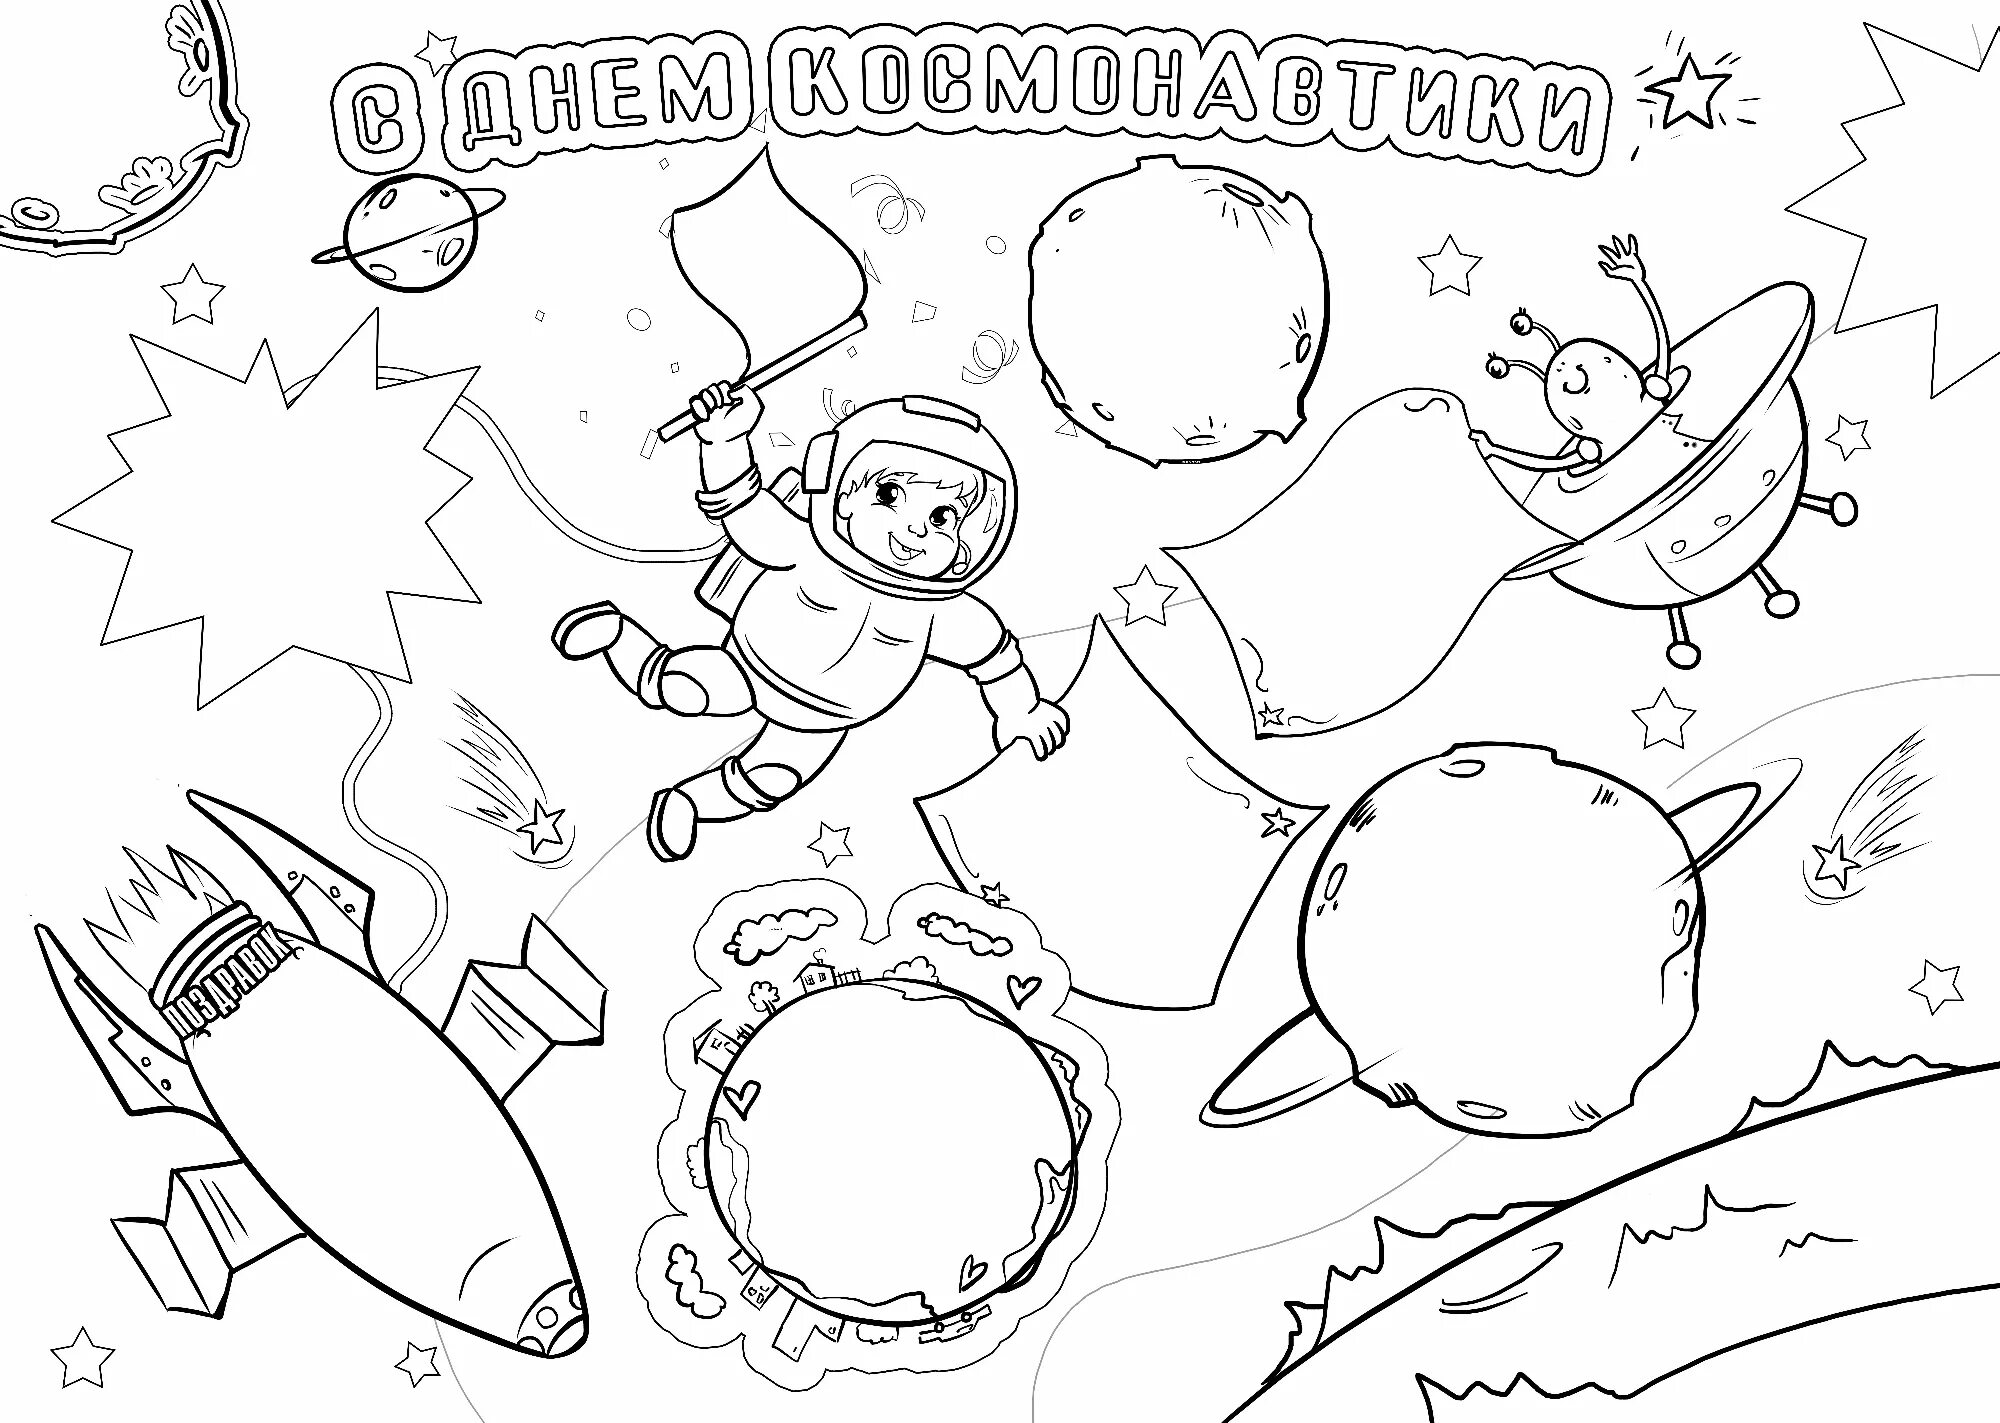 Grade 1 grand space coloring page